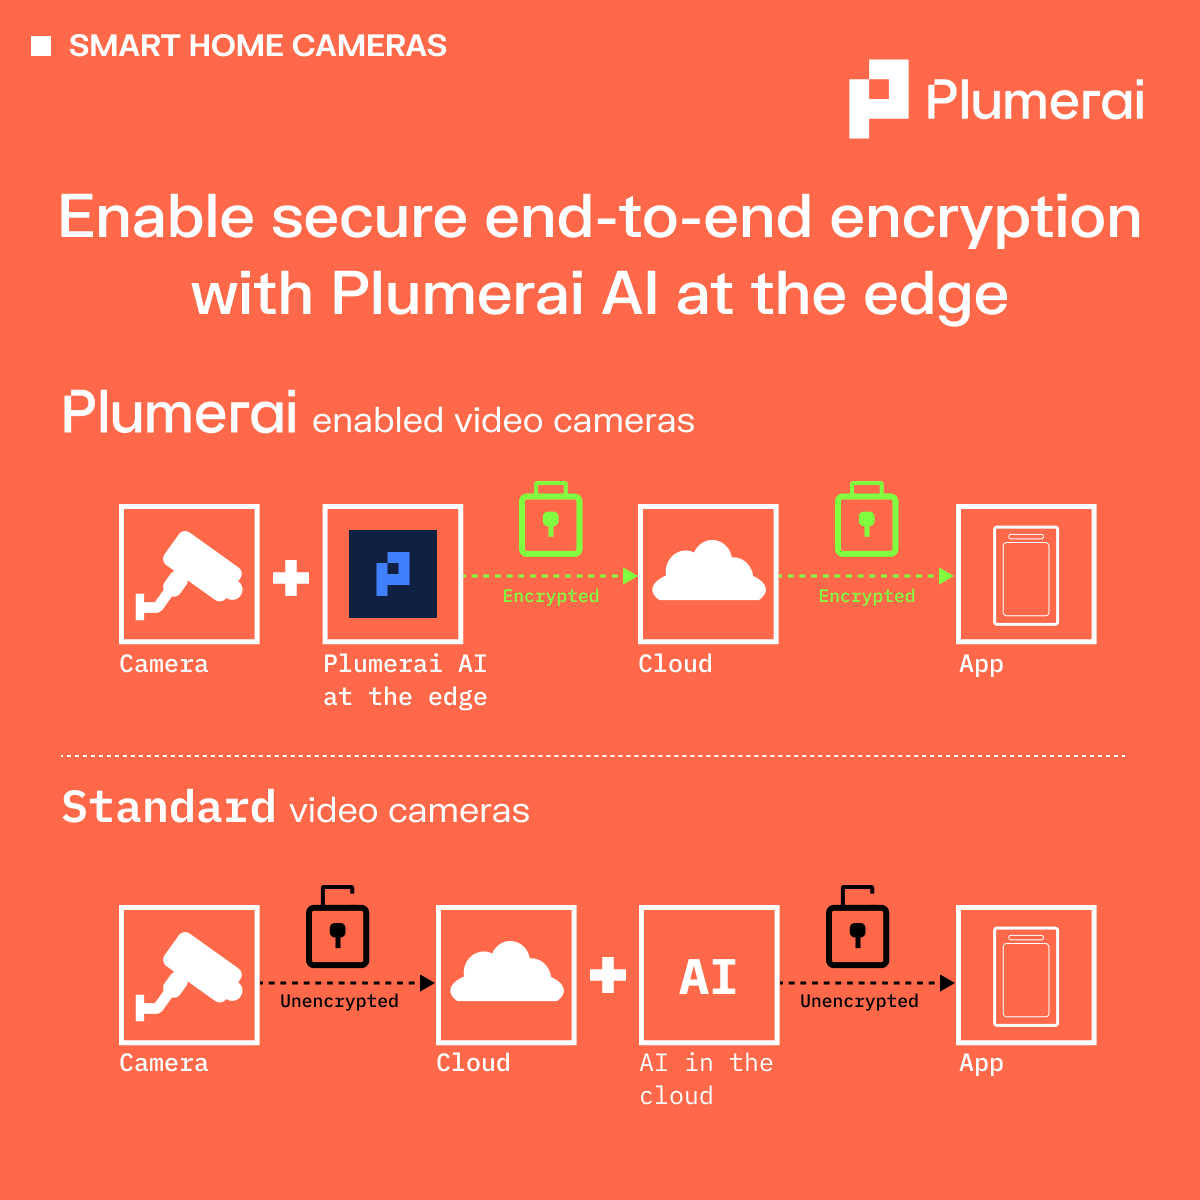 Enable secure end-to-end encryption with Plumerai AI at the edge